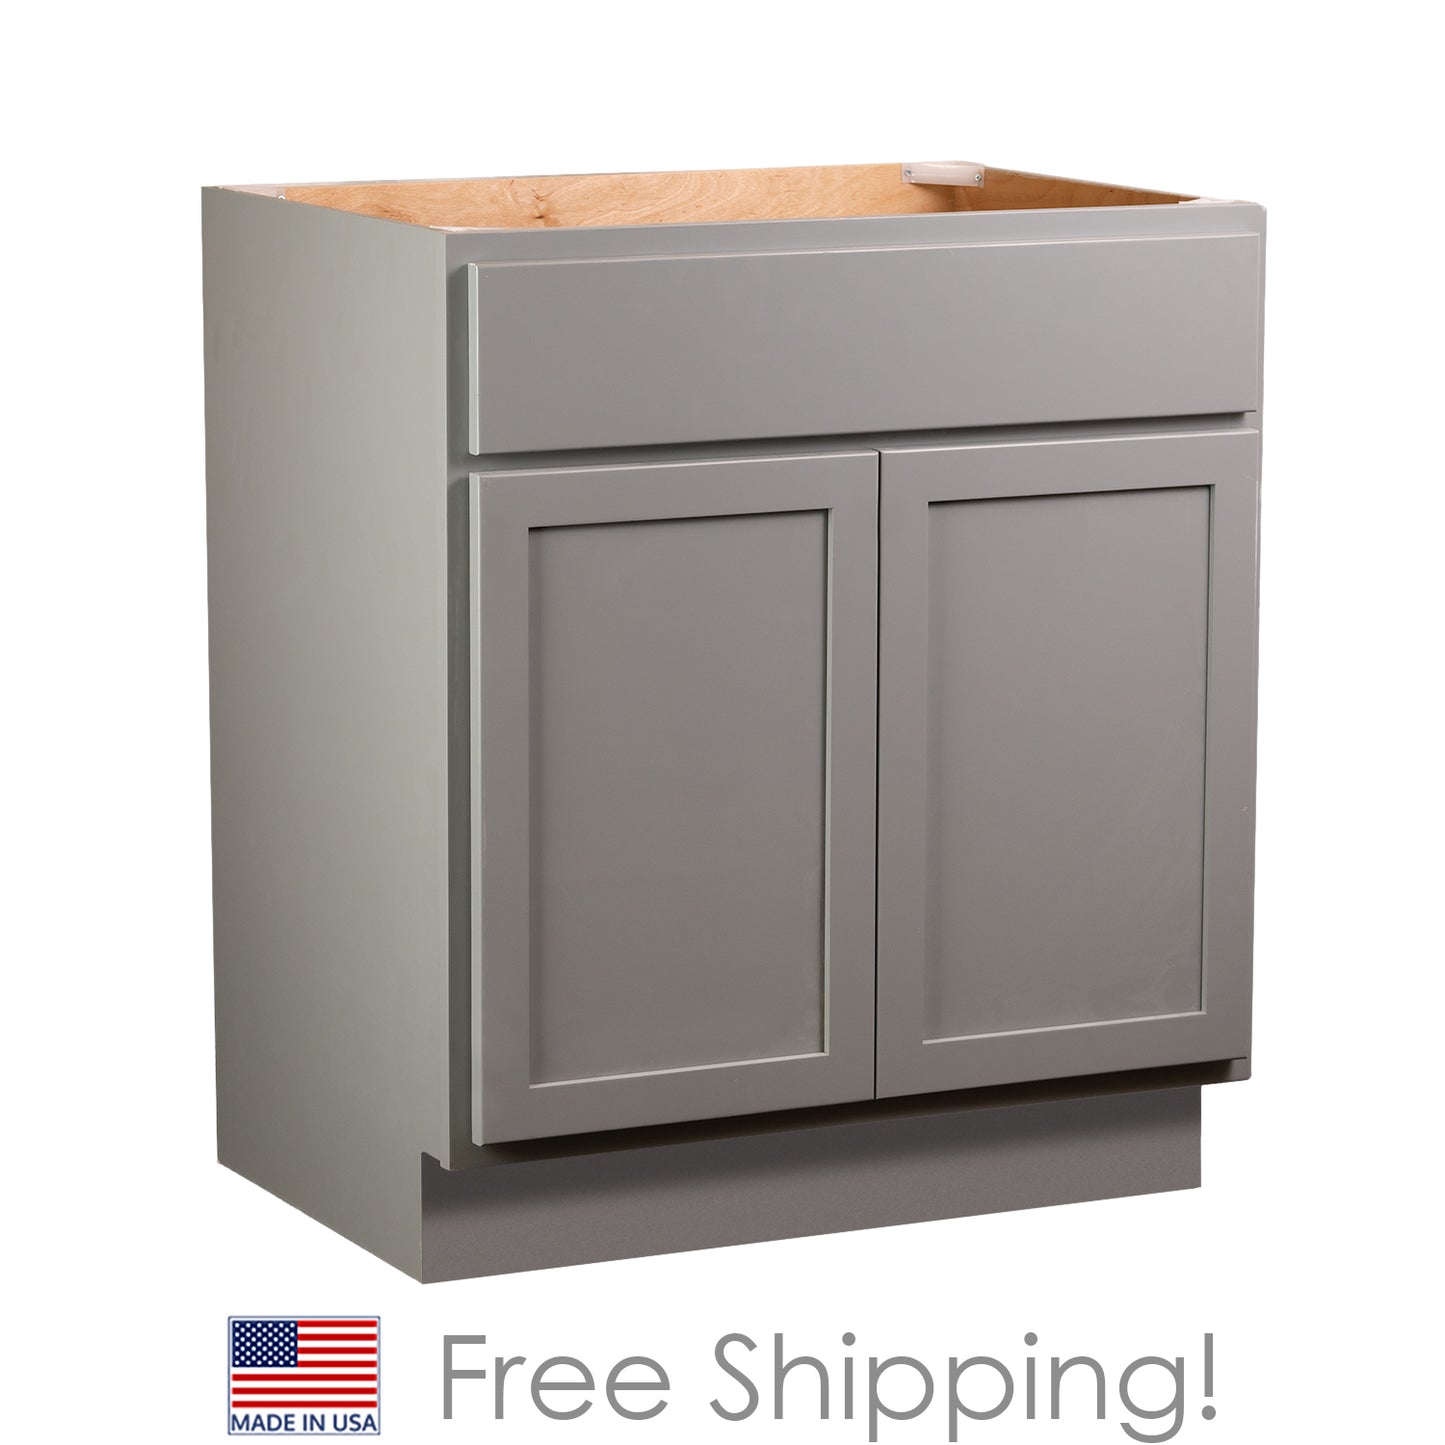 Quicklock RTA (Ready-to-Assemble) Magnetic Gray Vanity Base Cabinet- 42"W